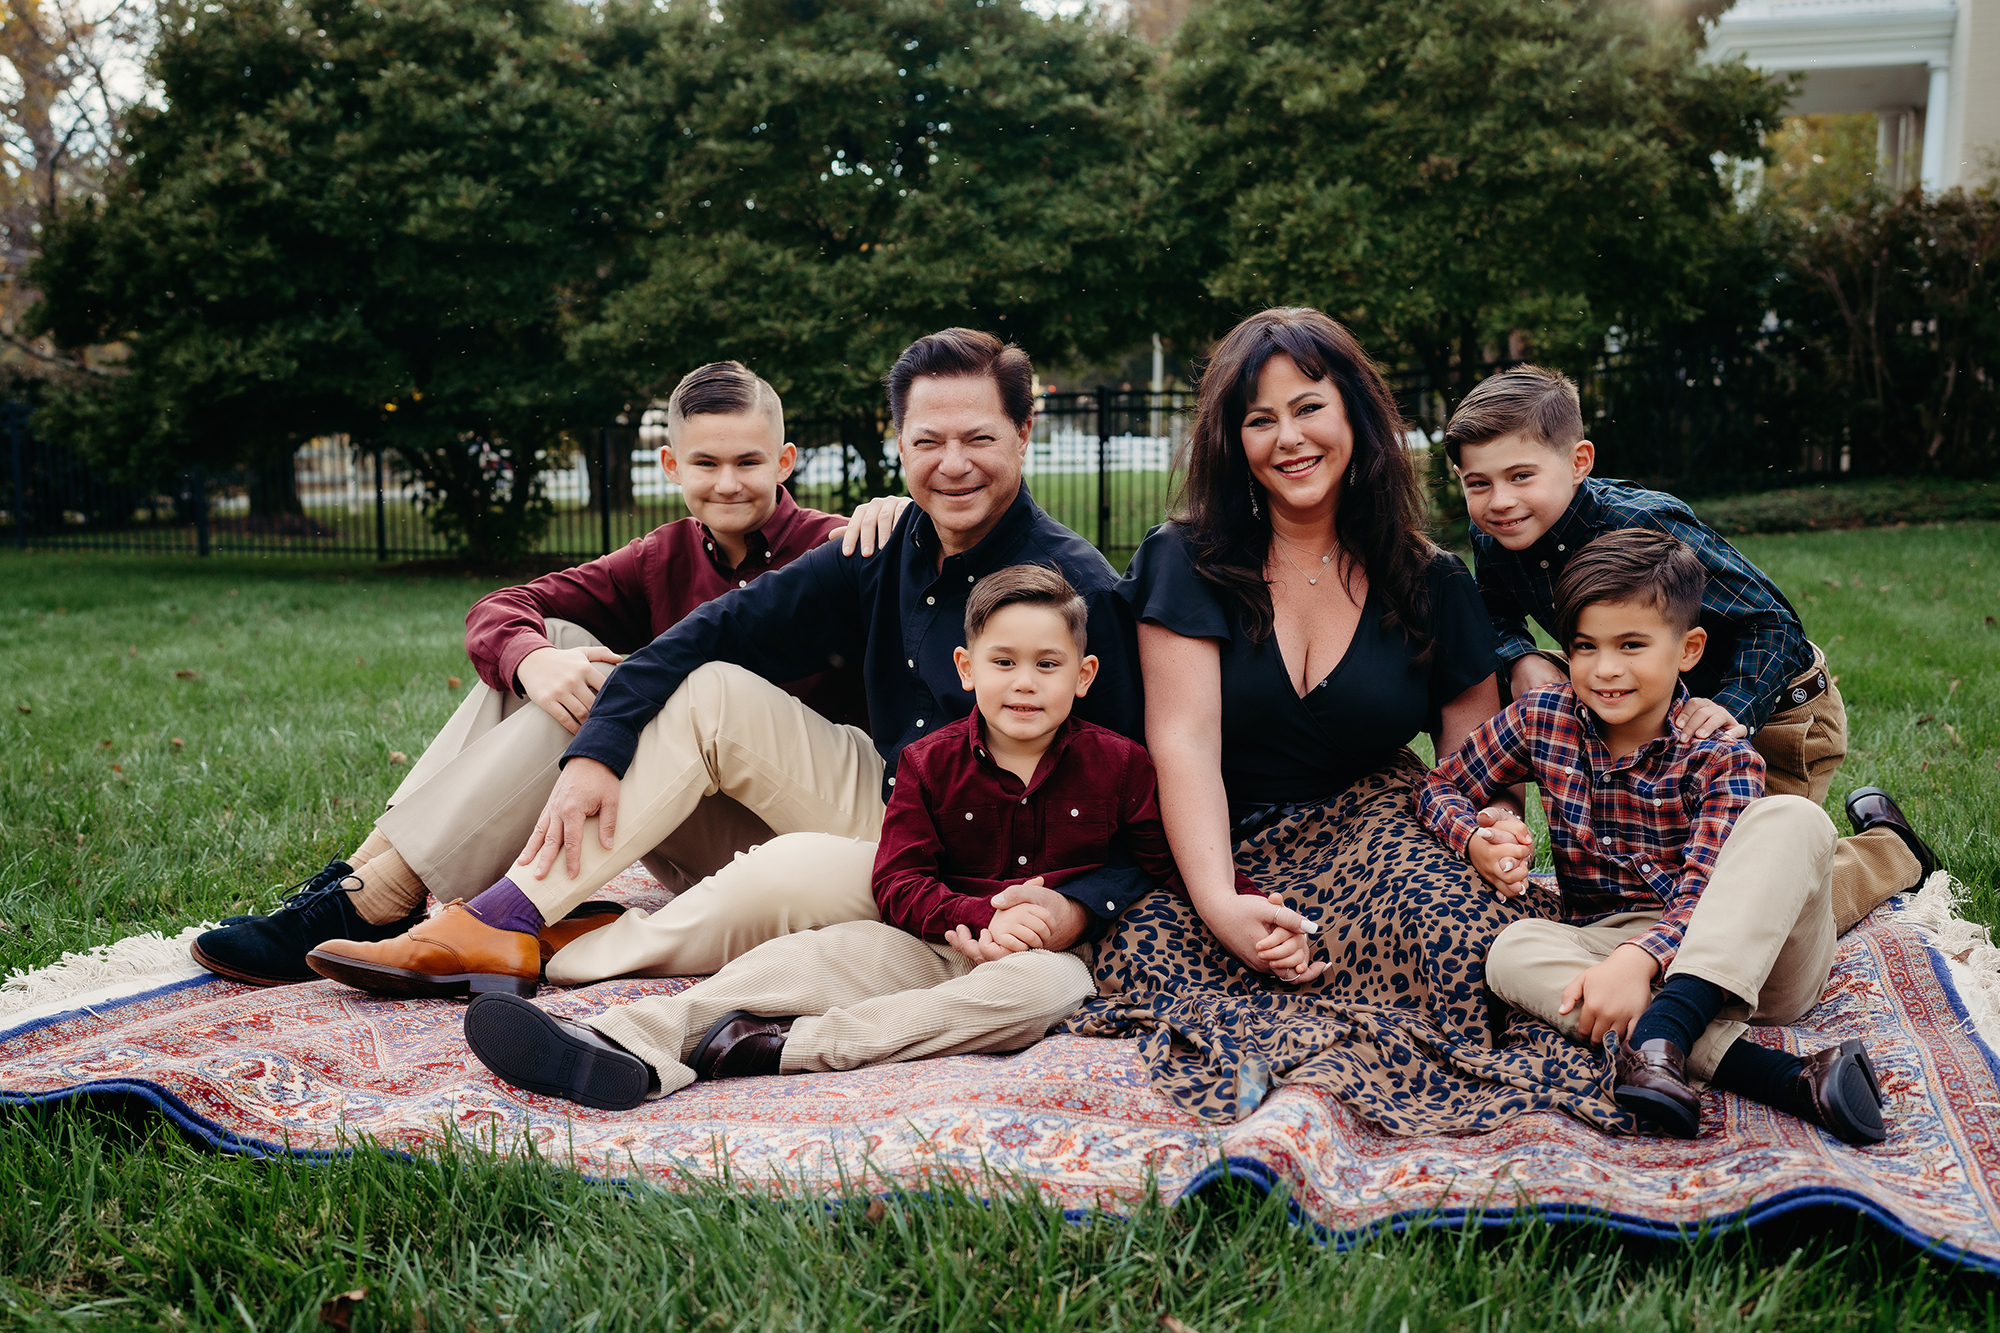 Denver family photographers capture a full family sitting together on a rug in a lush green backyard in Maryland